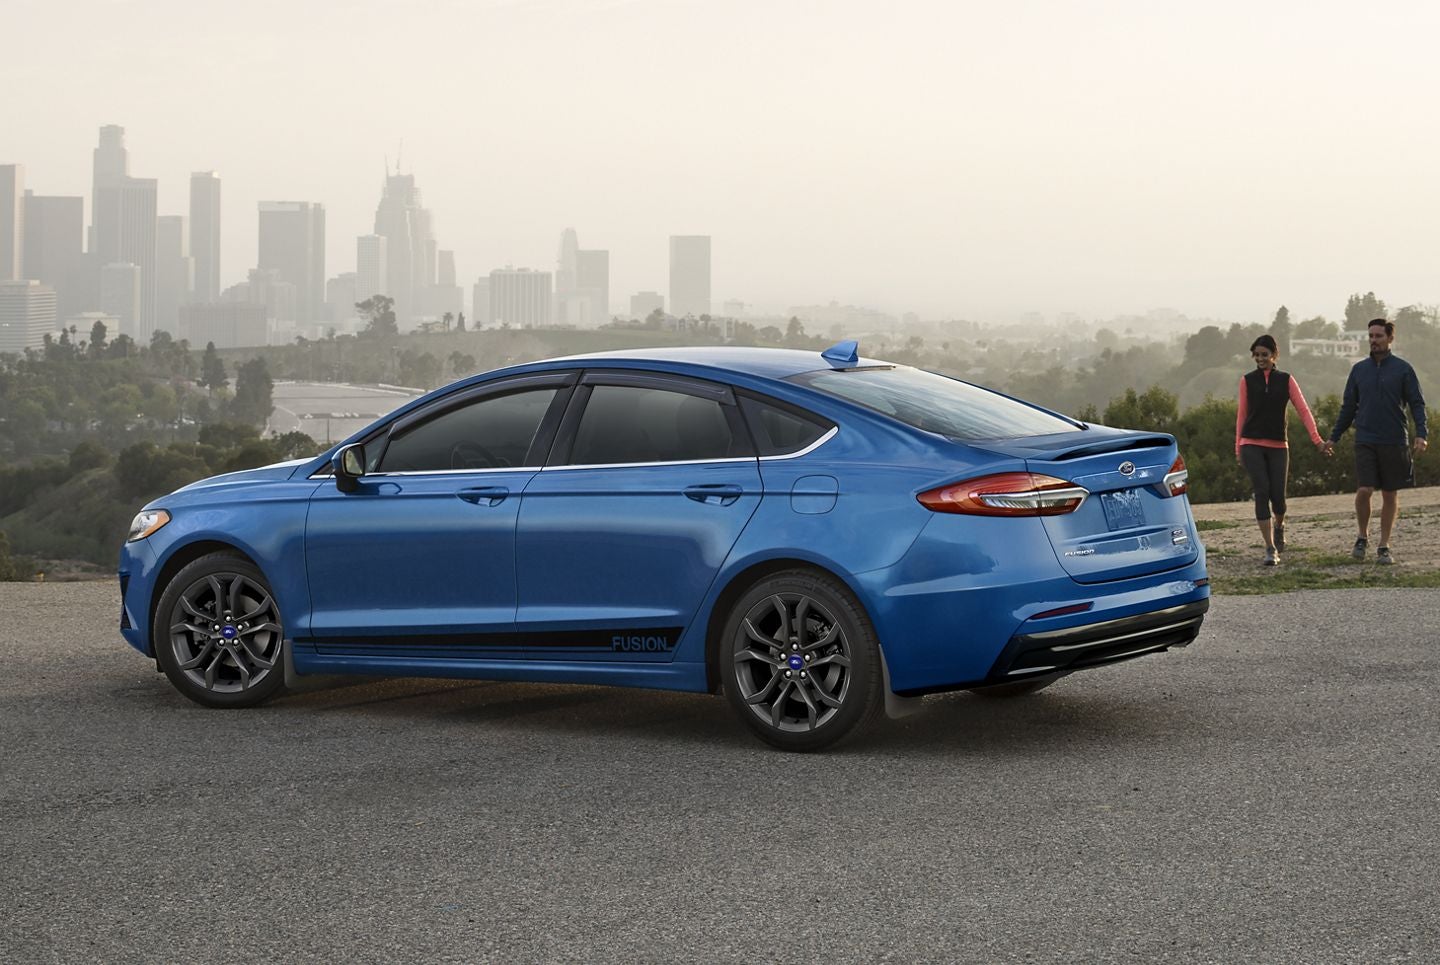 Meet the All-New 2020 Ford Fusion | Avis Ford in Southfield, MI